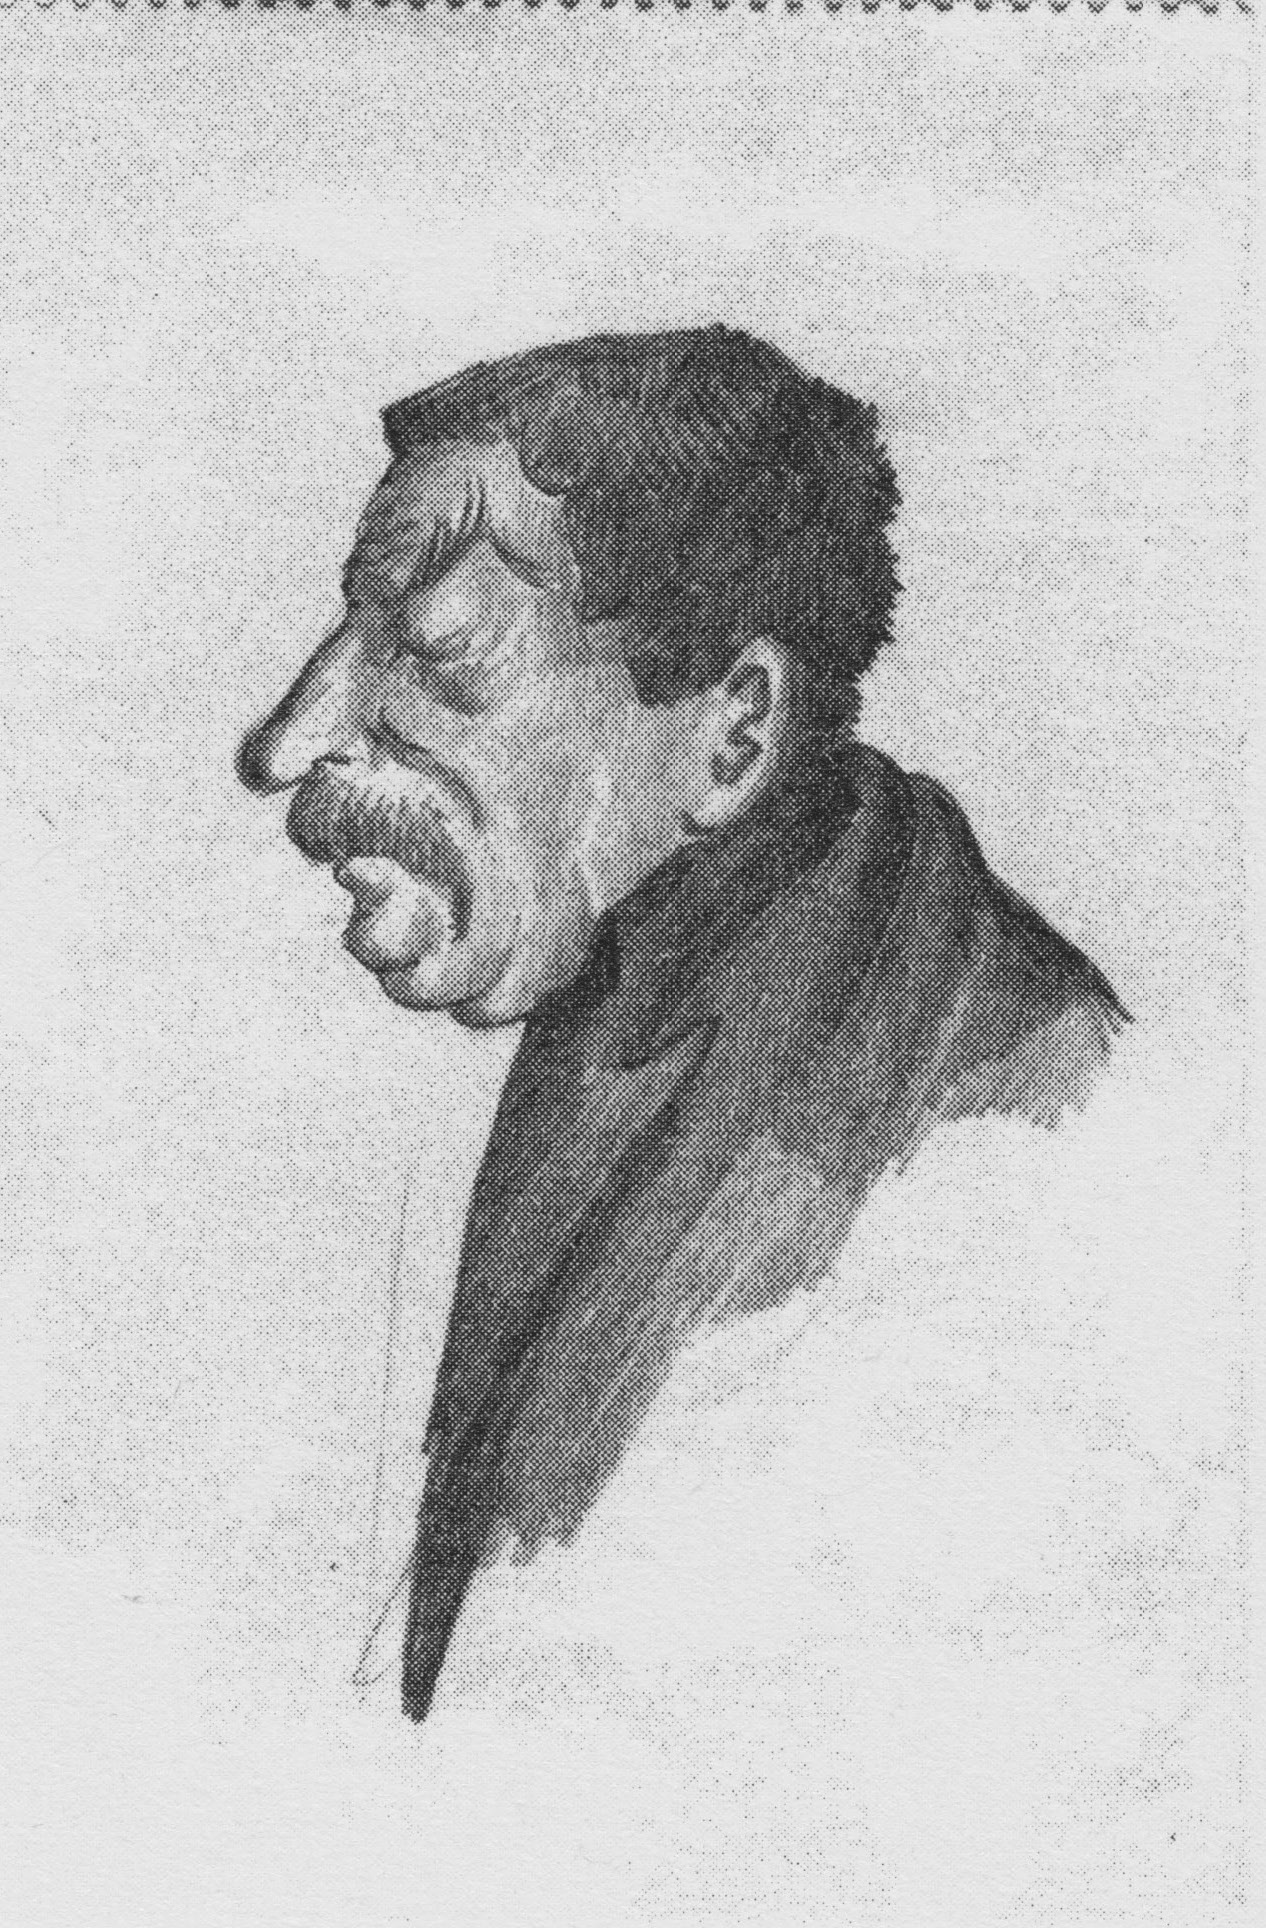 J V Stalin Sketched By N I Bukharin April 1929 The Charnel House